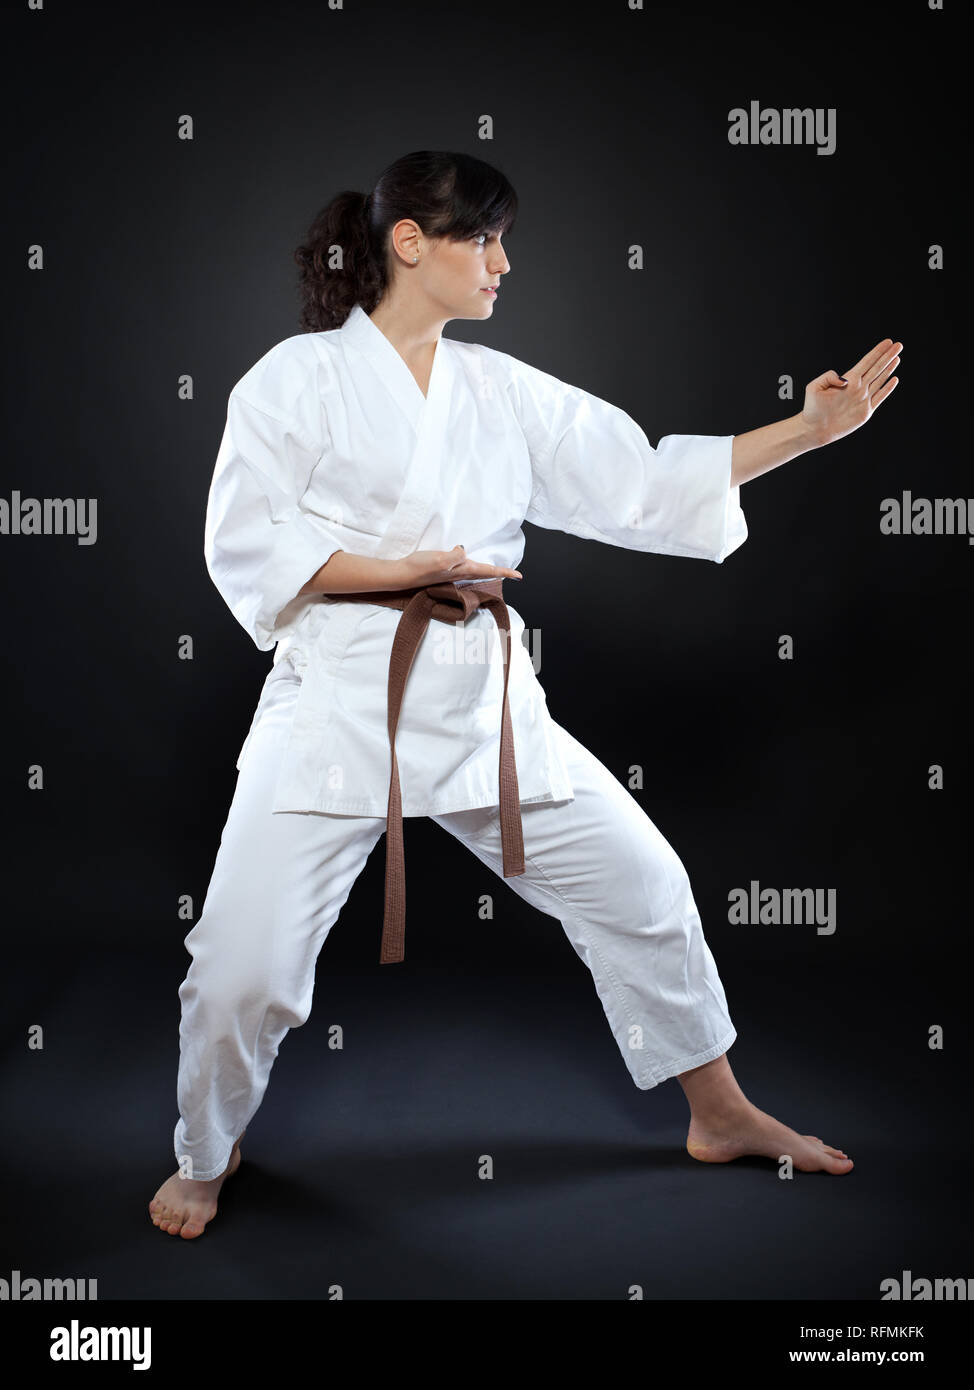 Karate woman in doing  pose on black background Stock Photo